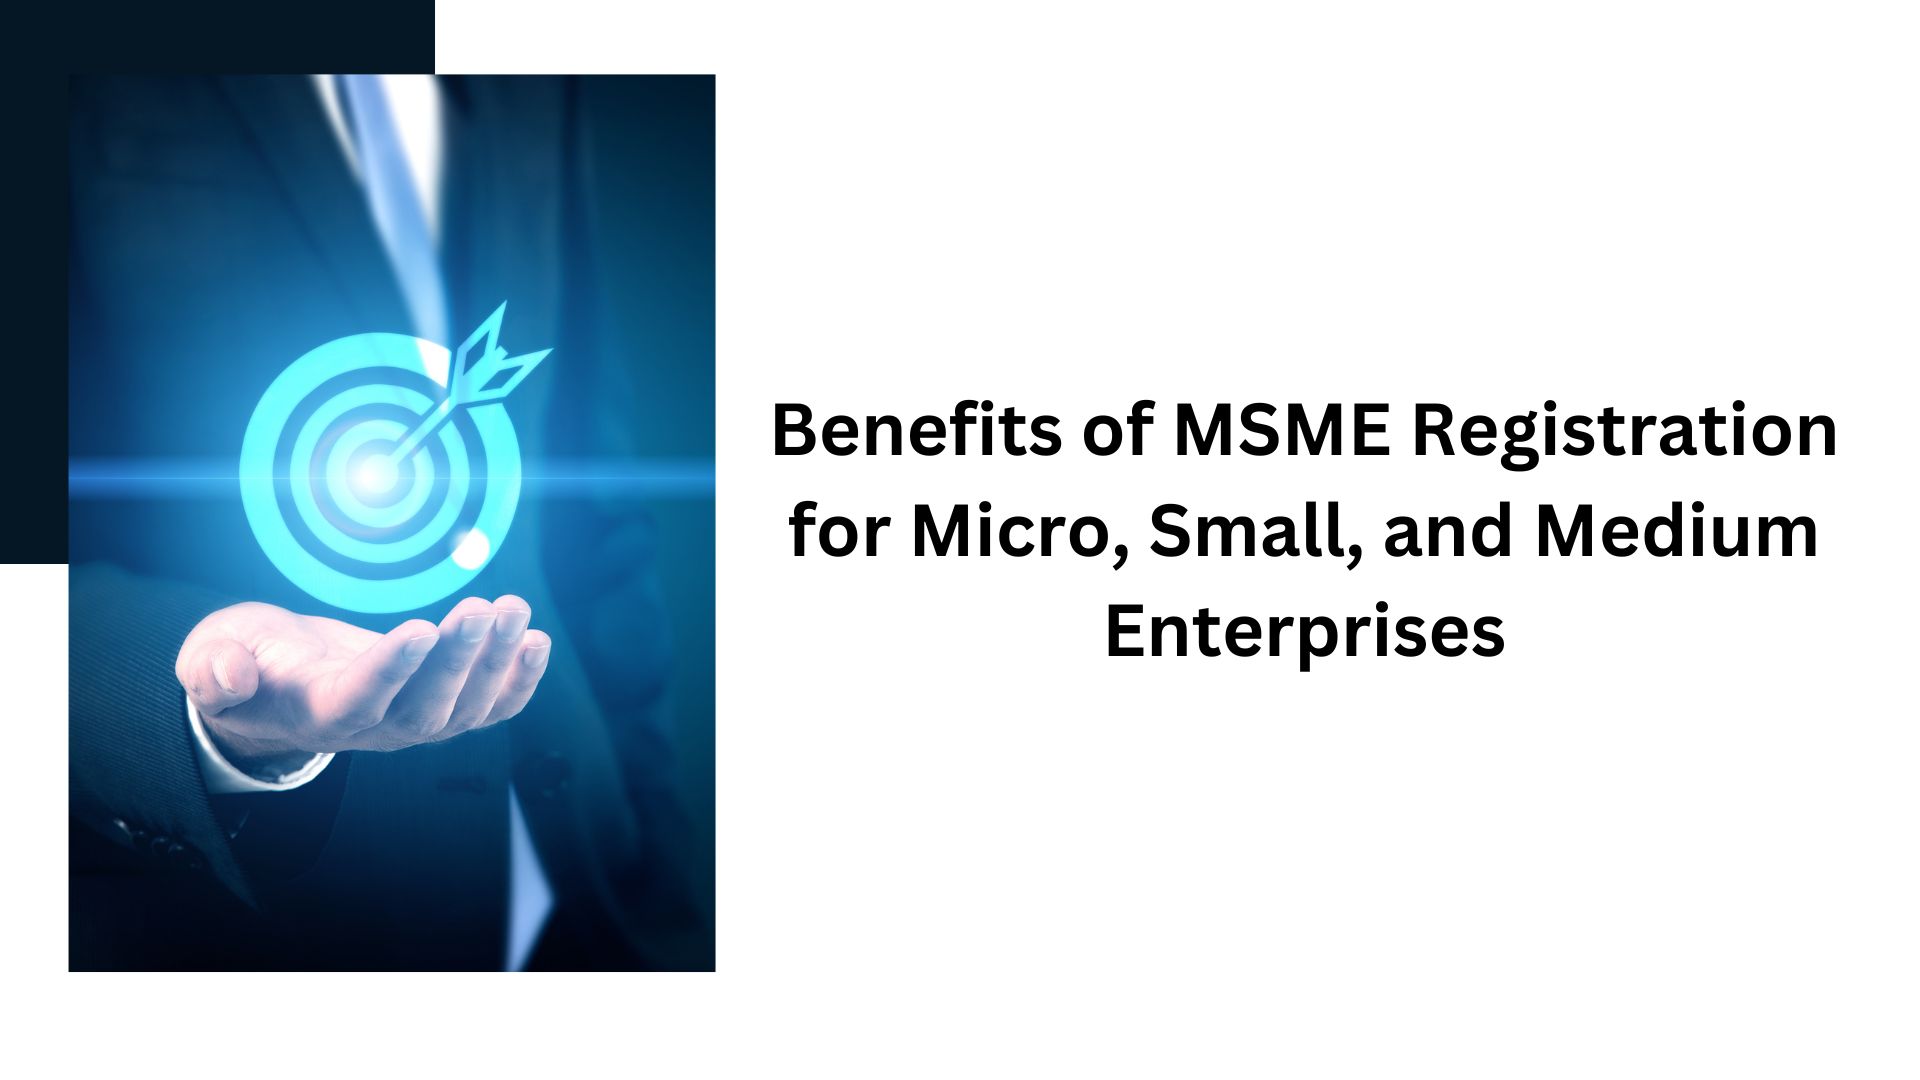 Benefits of MSME Registration for Micro, Small, and Medium Enterprises